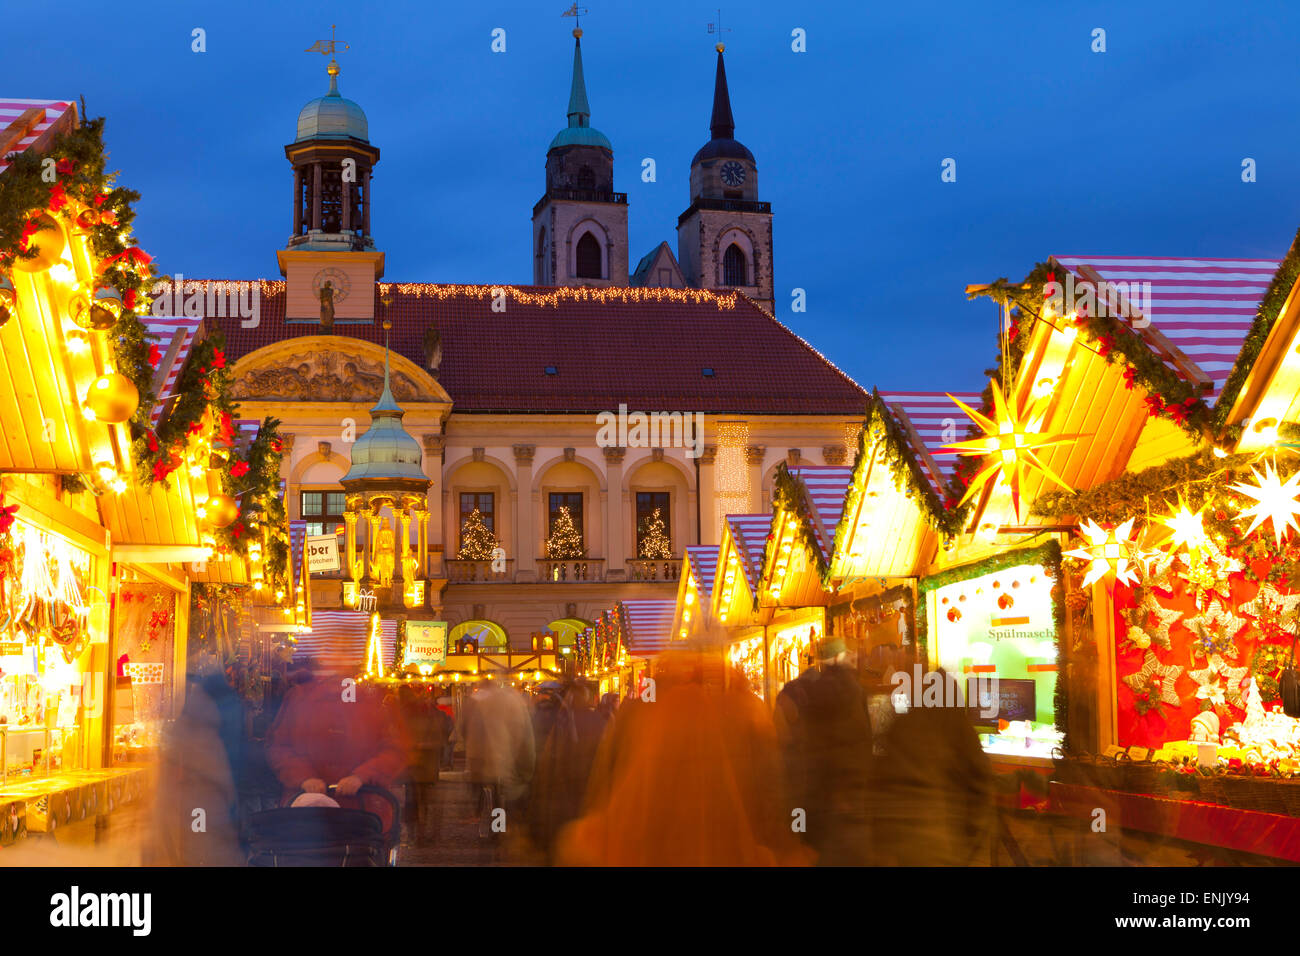 Christmas Market in the AlterMarkt with the Baroque Town Hall in the background, Magdeburg, Saxony-Anhalt, Germany, Europe Stock Photo